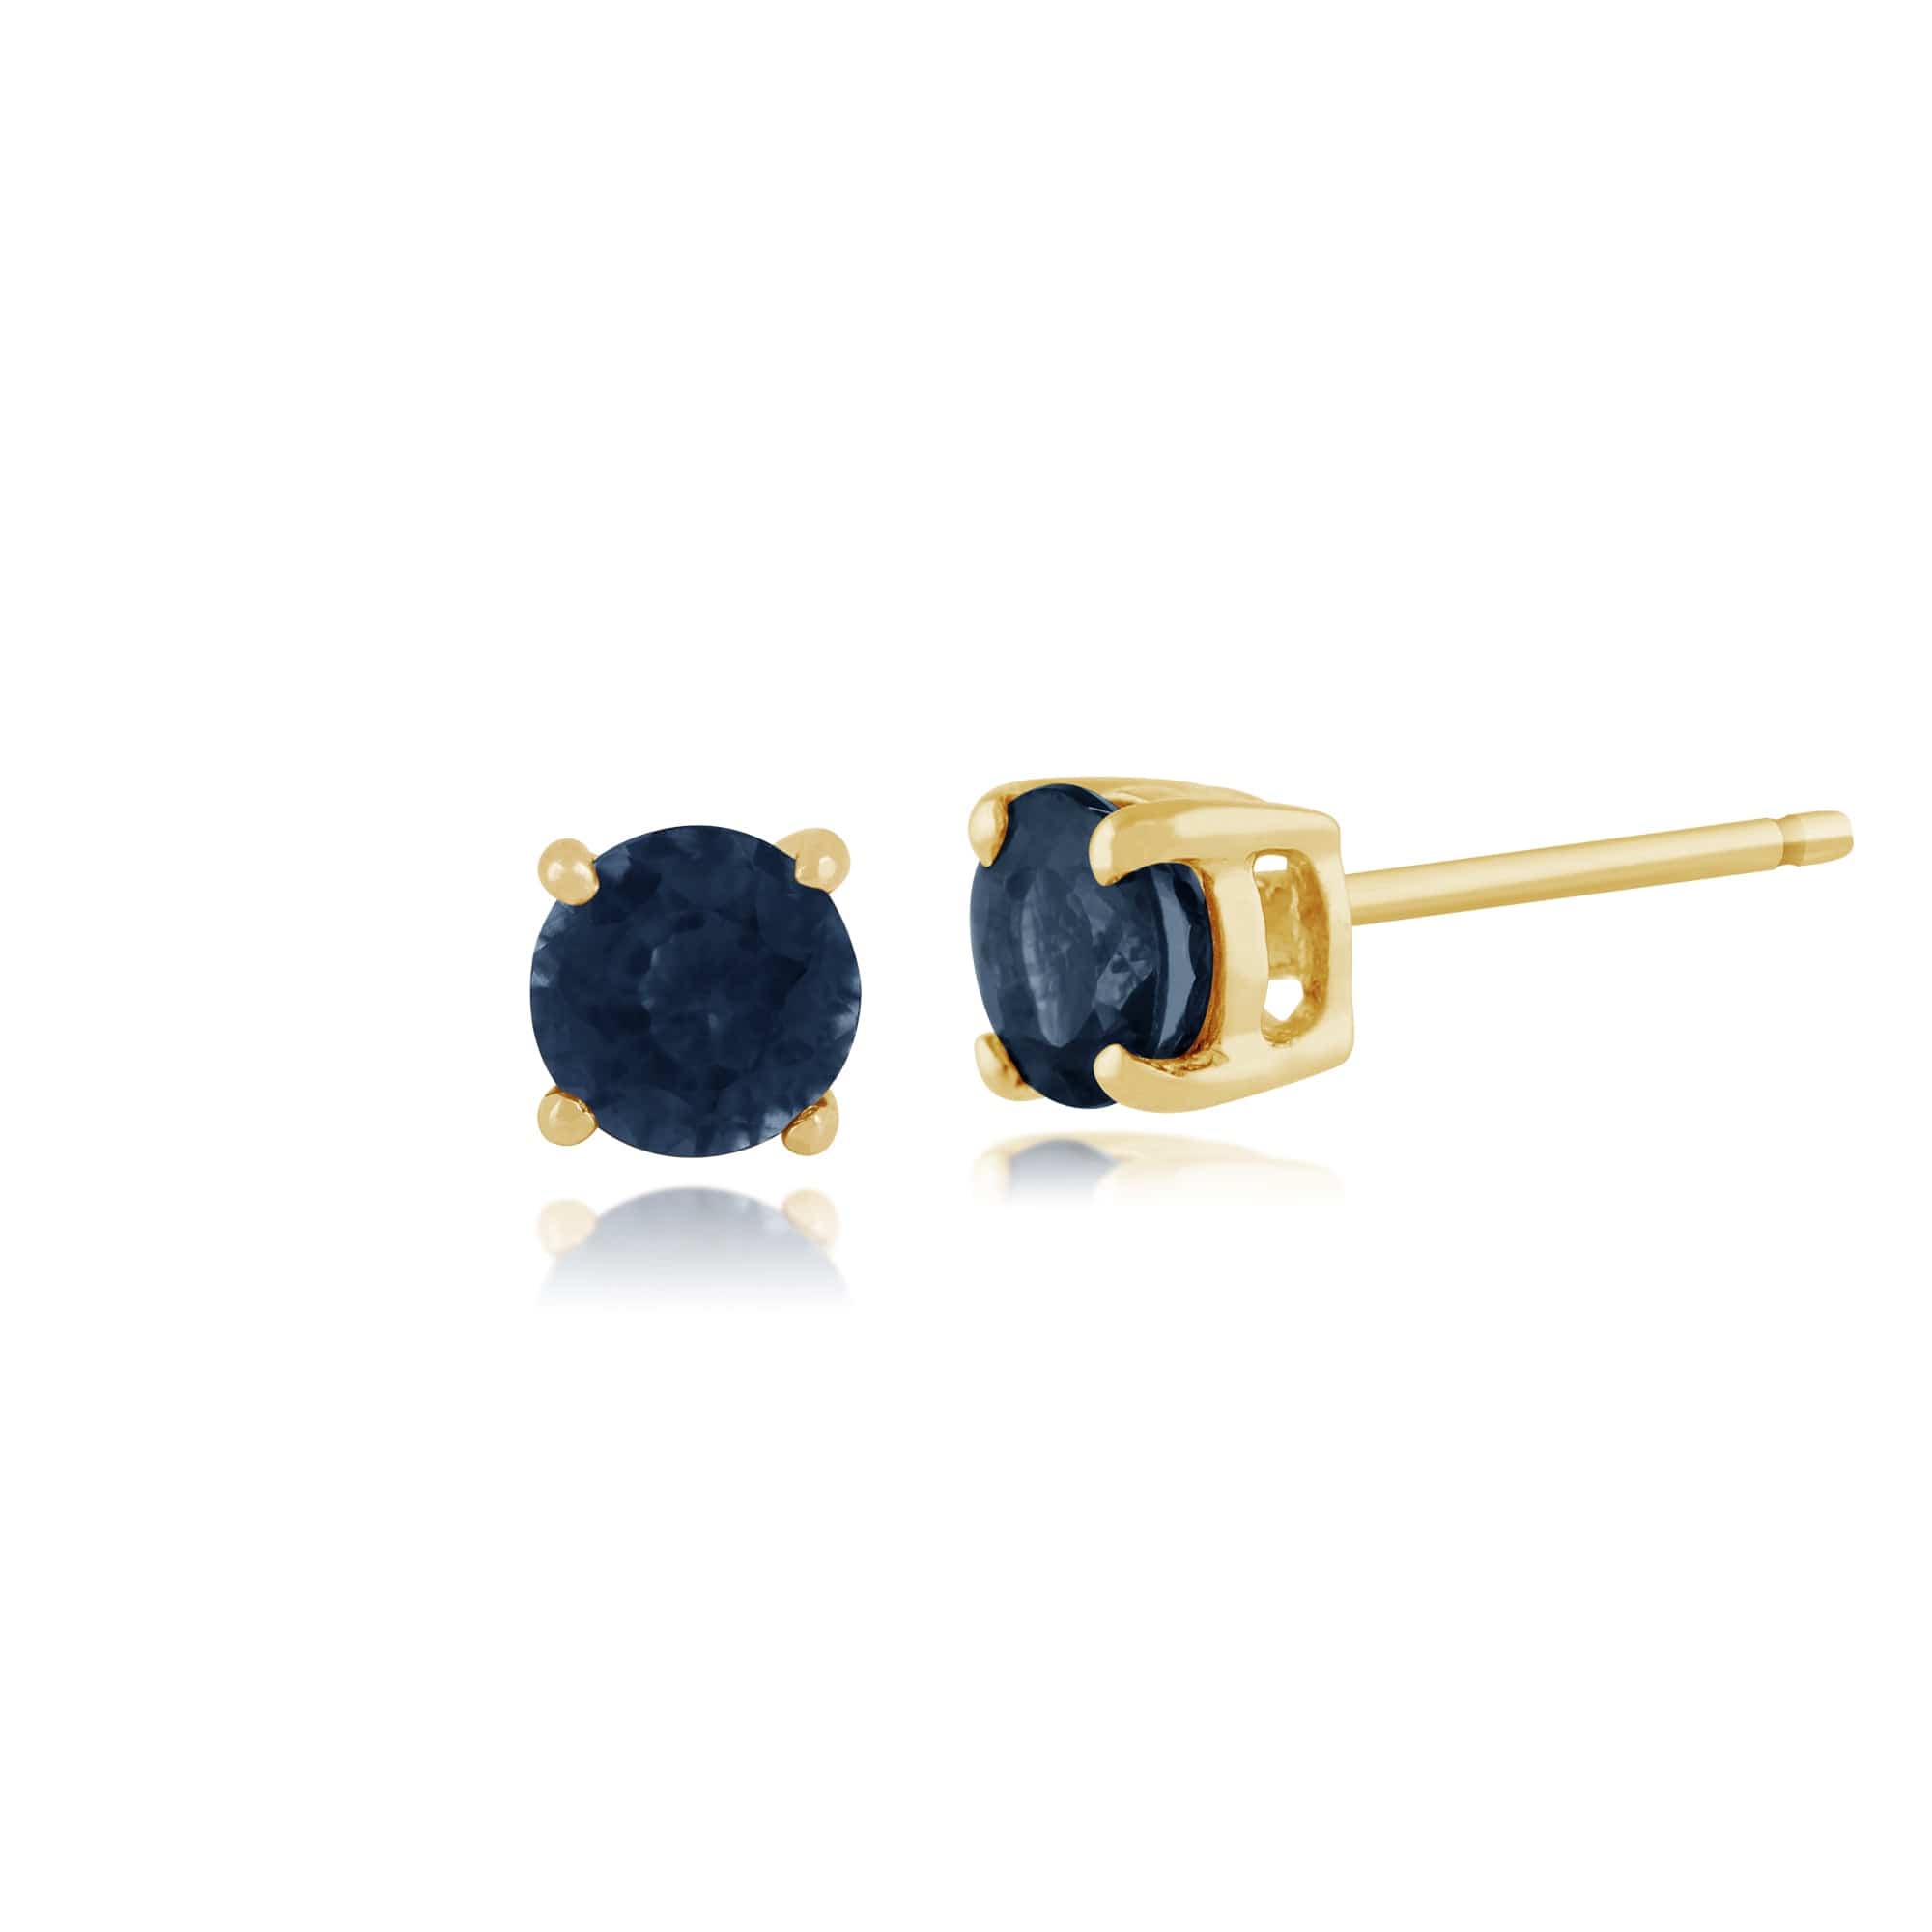 Classic Round Sapphire Stud Earrings with Detachable Diamond Square Earrings Jacket Set in 9ct Yellow Gold - Gemondo